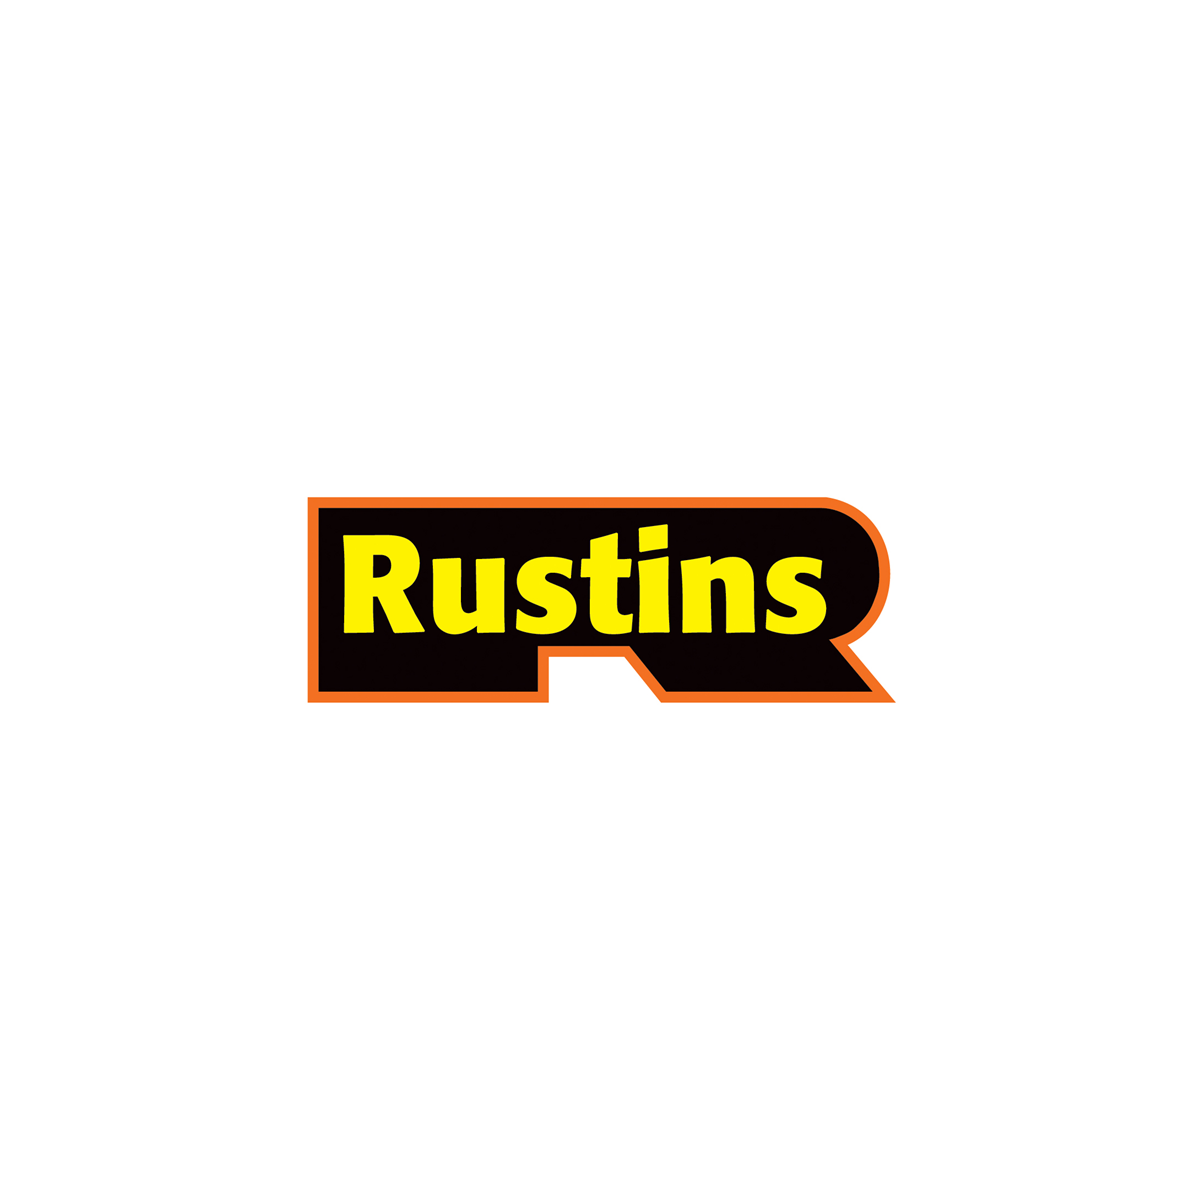 Where to Buy Rustins ASAP Paints